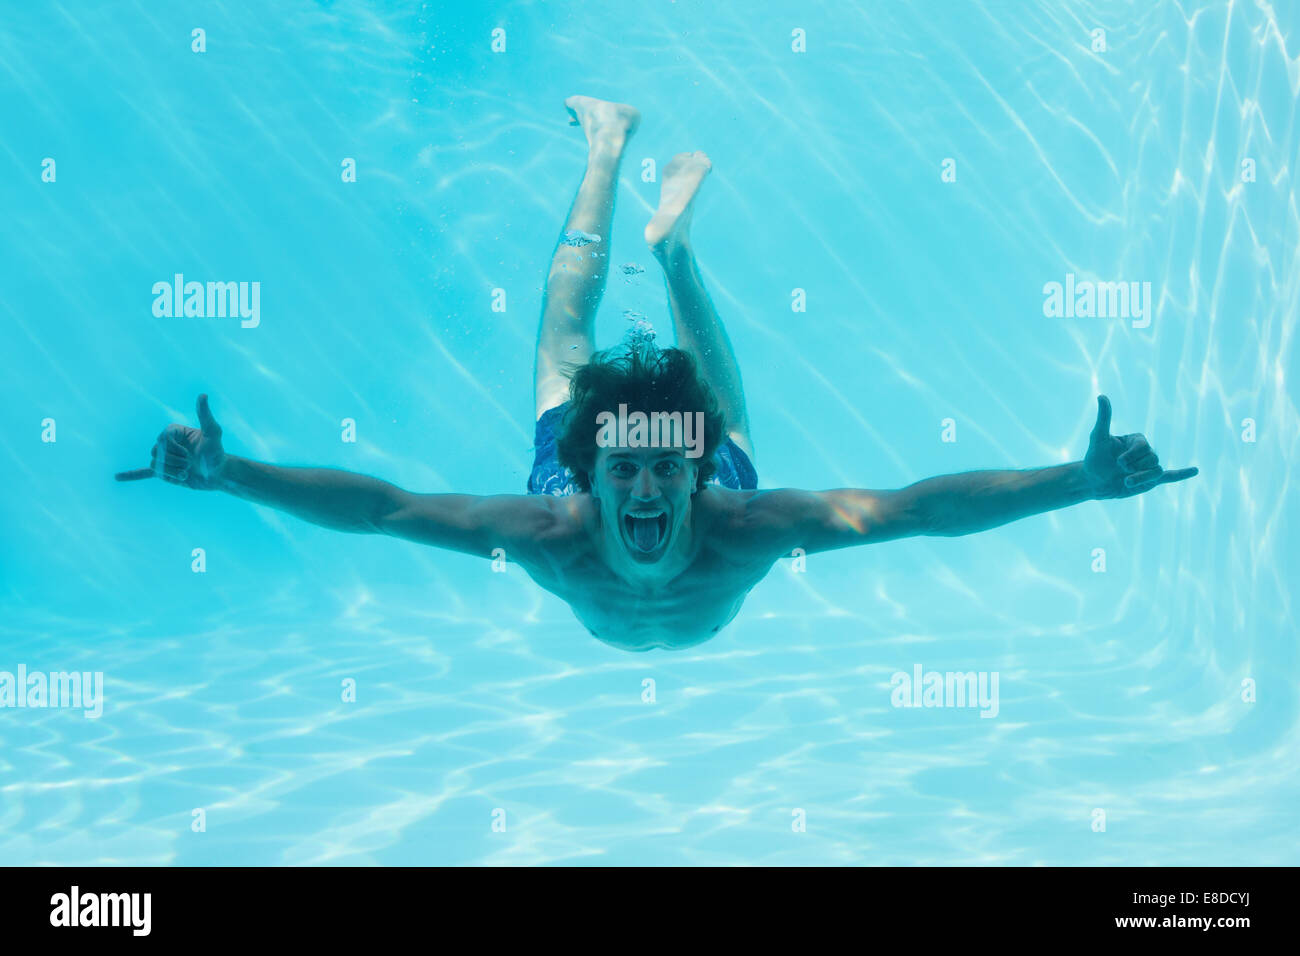 Young man swimming underwater Banque D'Images